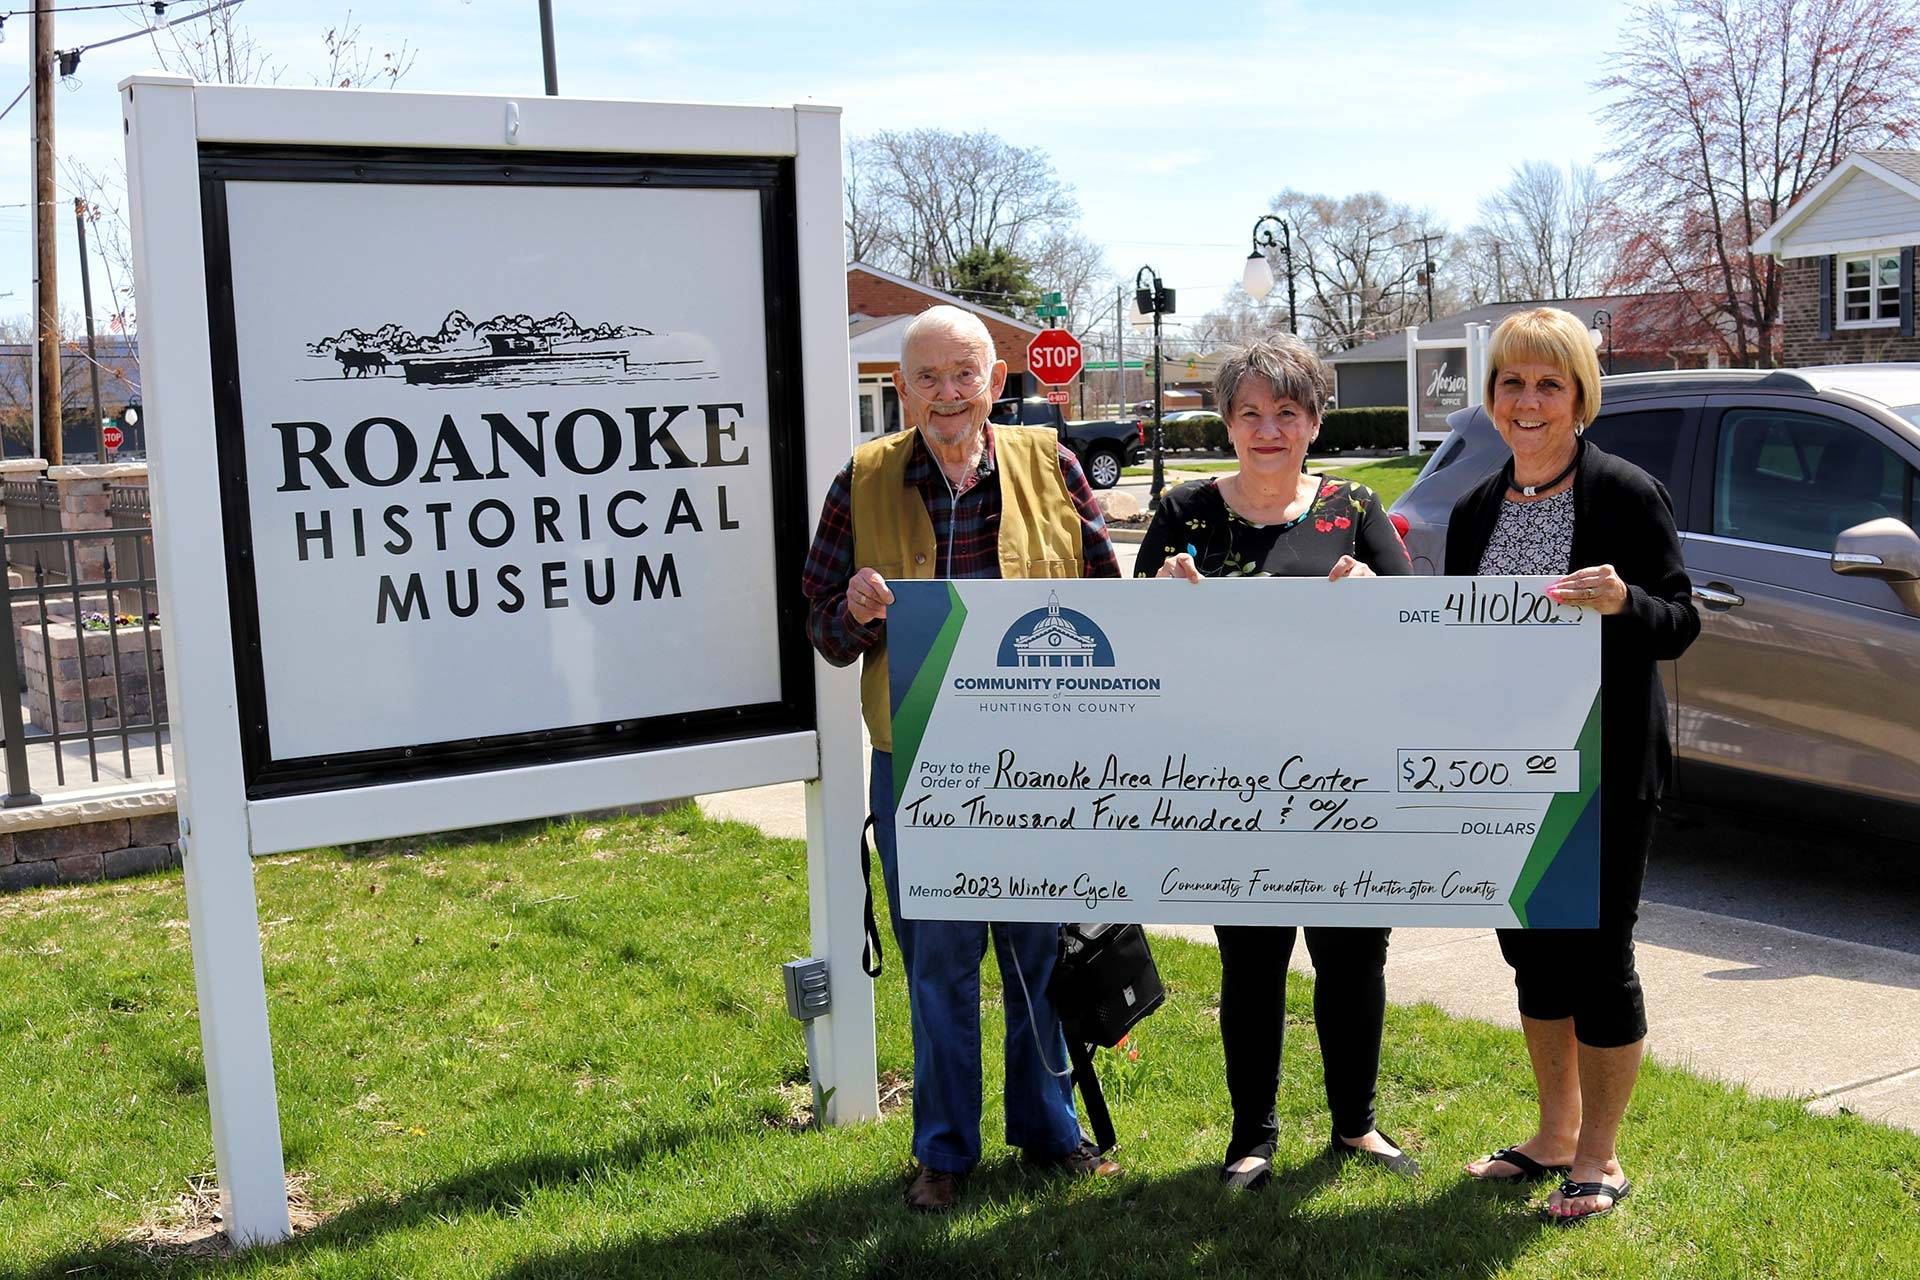 Three adults holding a check for the Roanoke Area Heritage Center for $2,500 in front of the Roanoke Historical Museum sign.